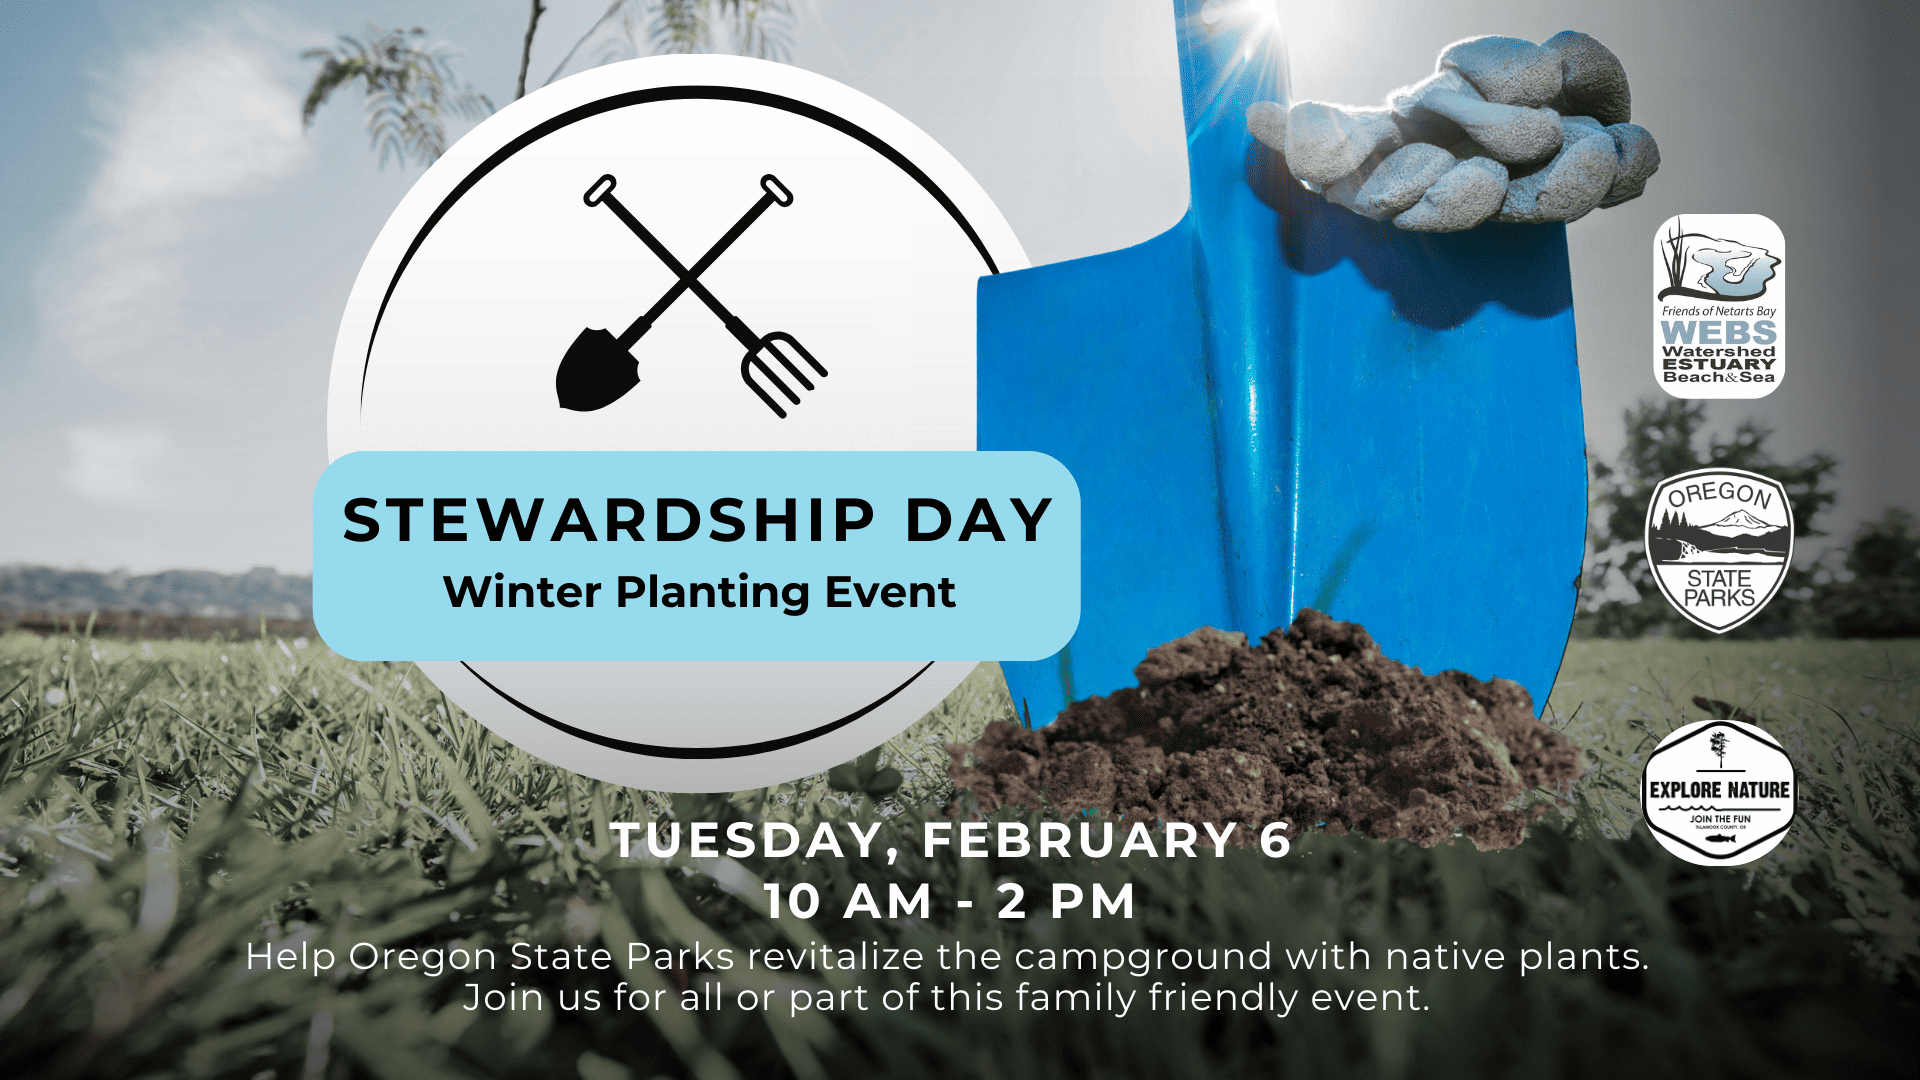 STEWARDSHIP DAY – Winter Planting Event at Cape Lookout State Park Feb. 6